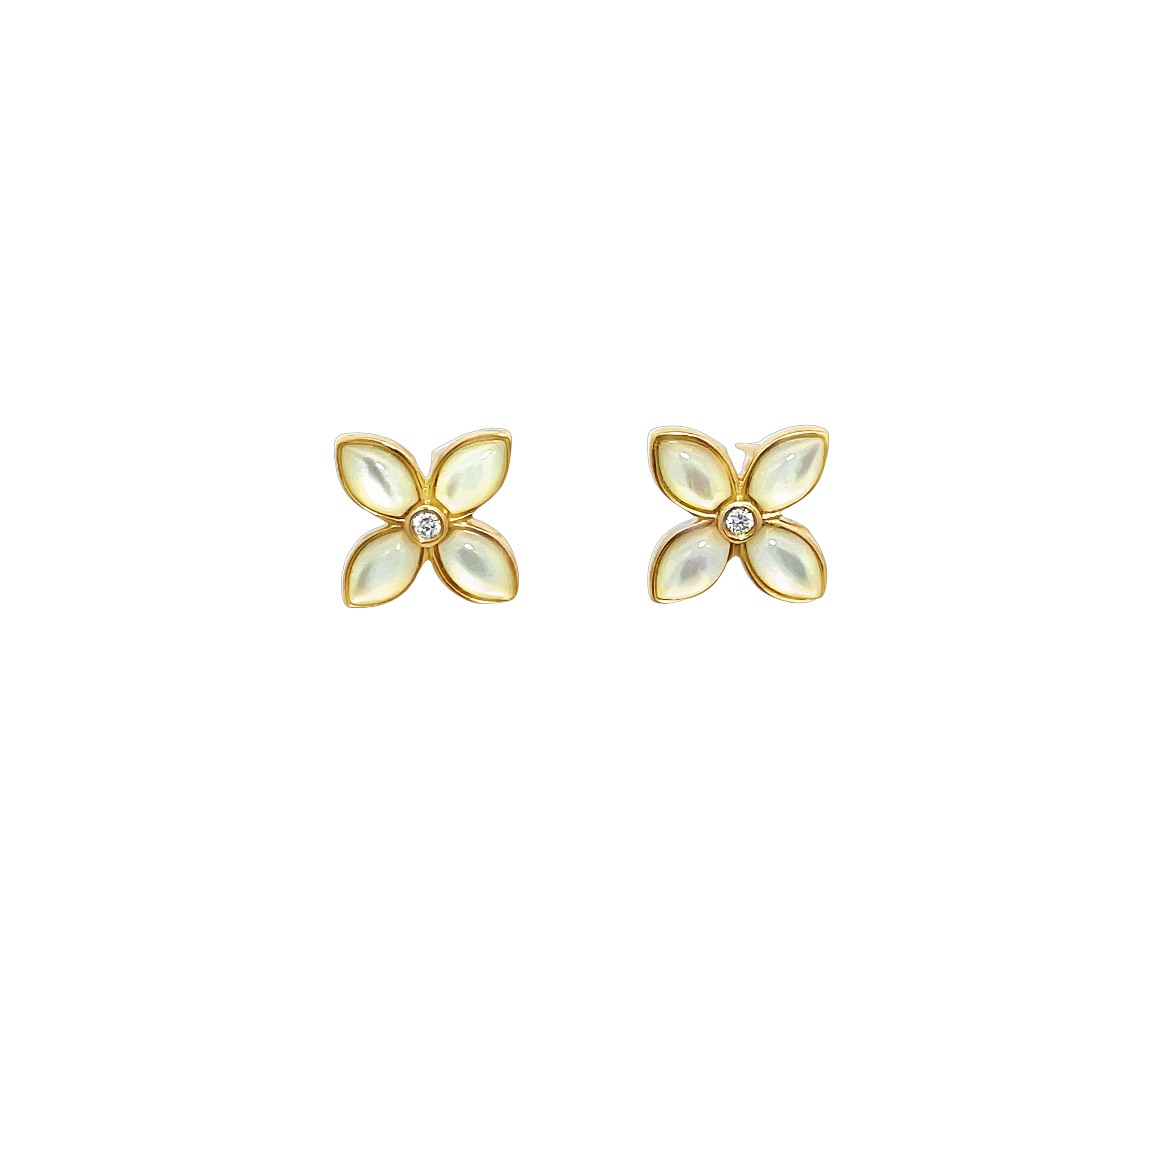 18K GOLD FLOWER EARRINGS WITH MOTHER OF PEARL